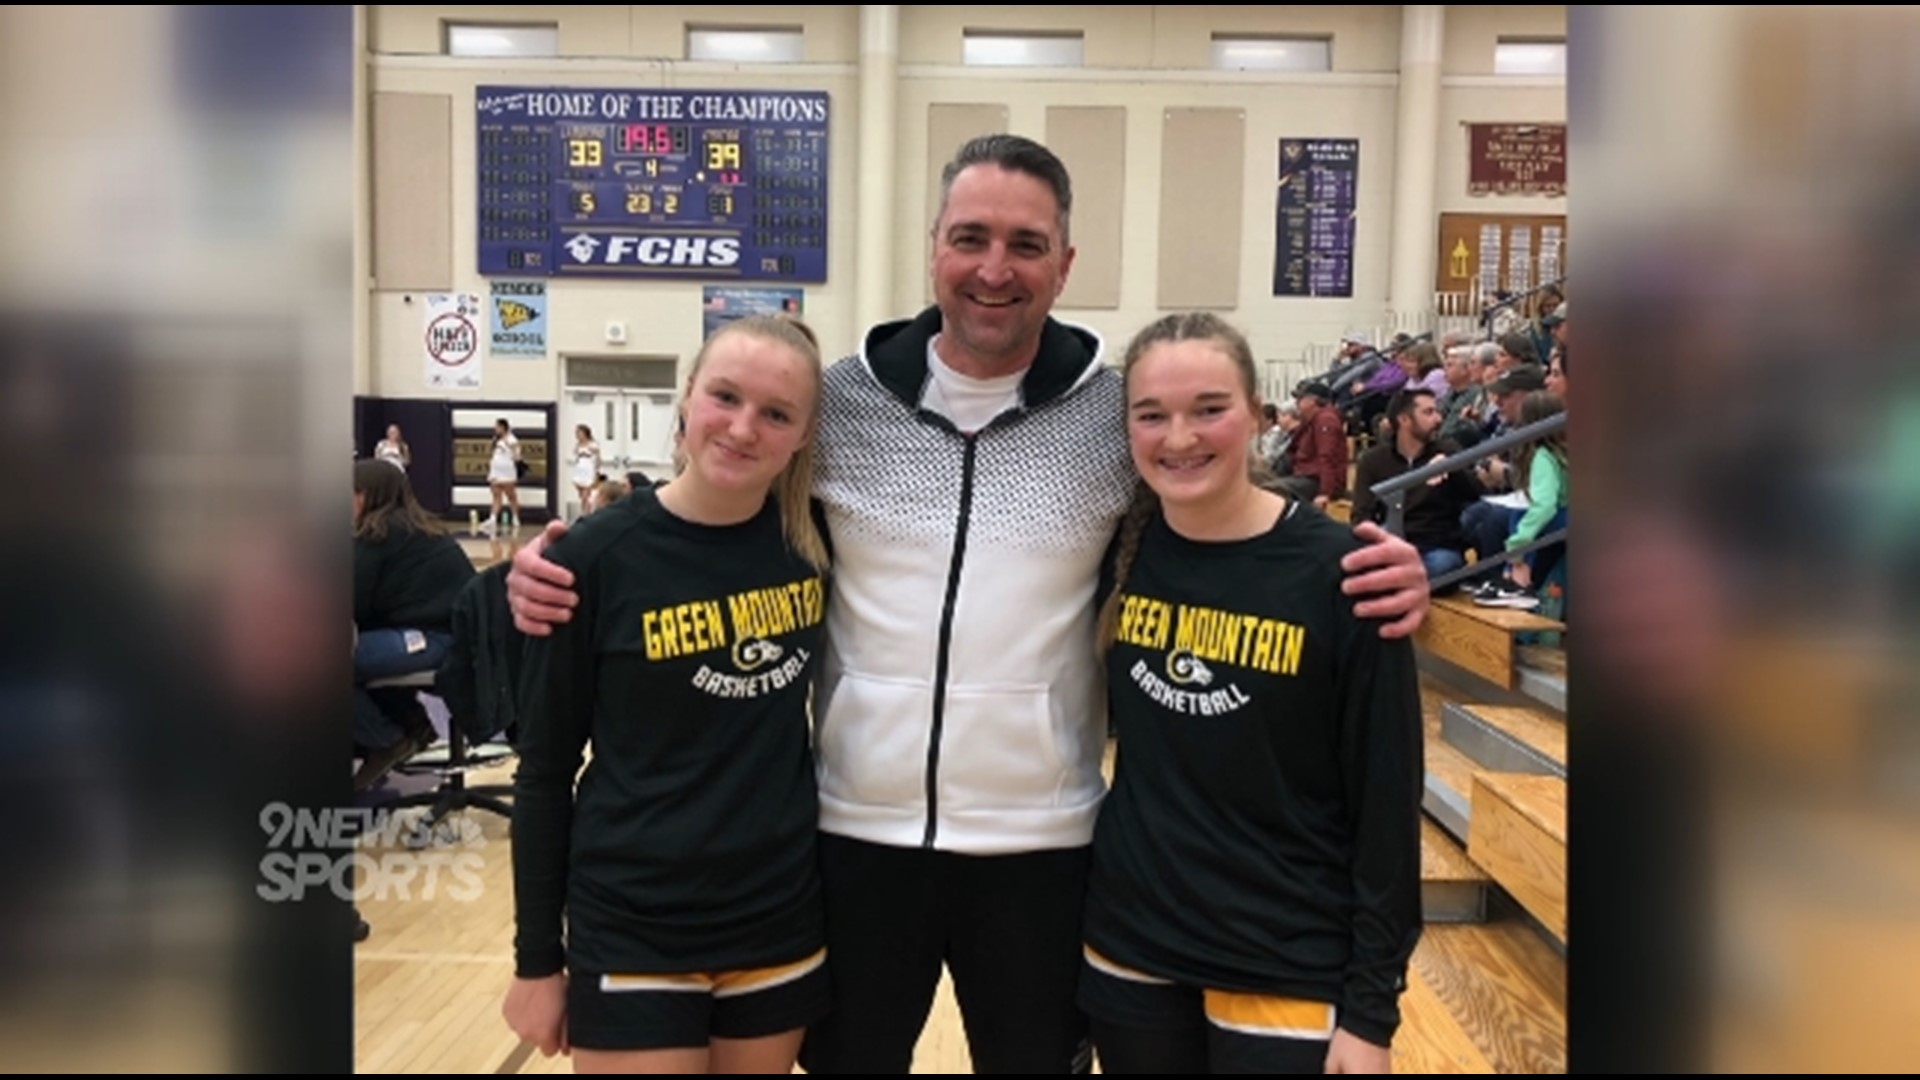 The Green Mountain girls basketball team is home to two sisters who are both starters, but what's more impressive is their family legacy.